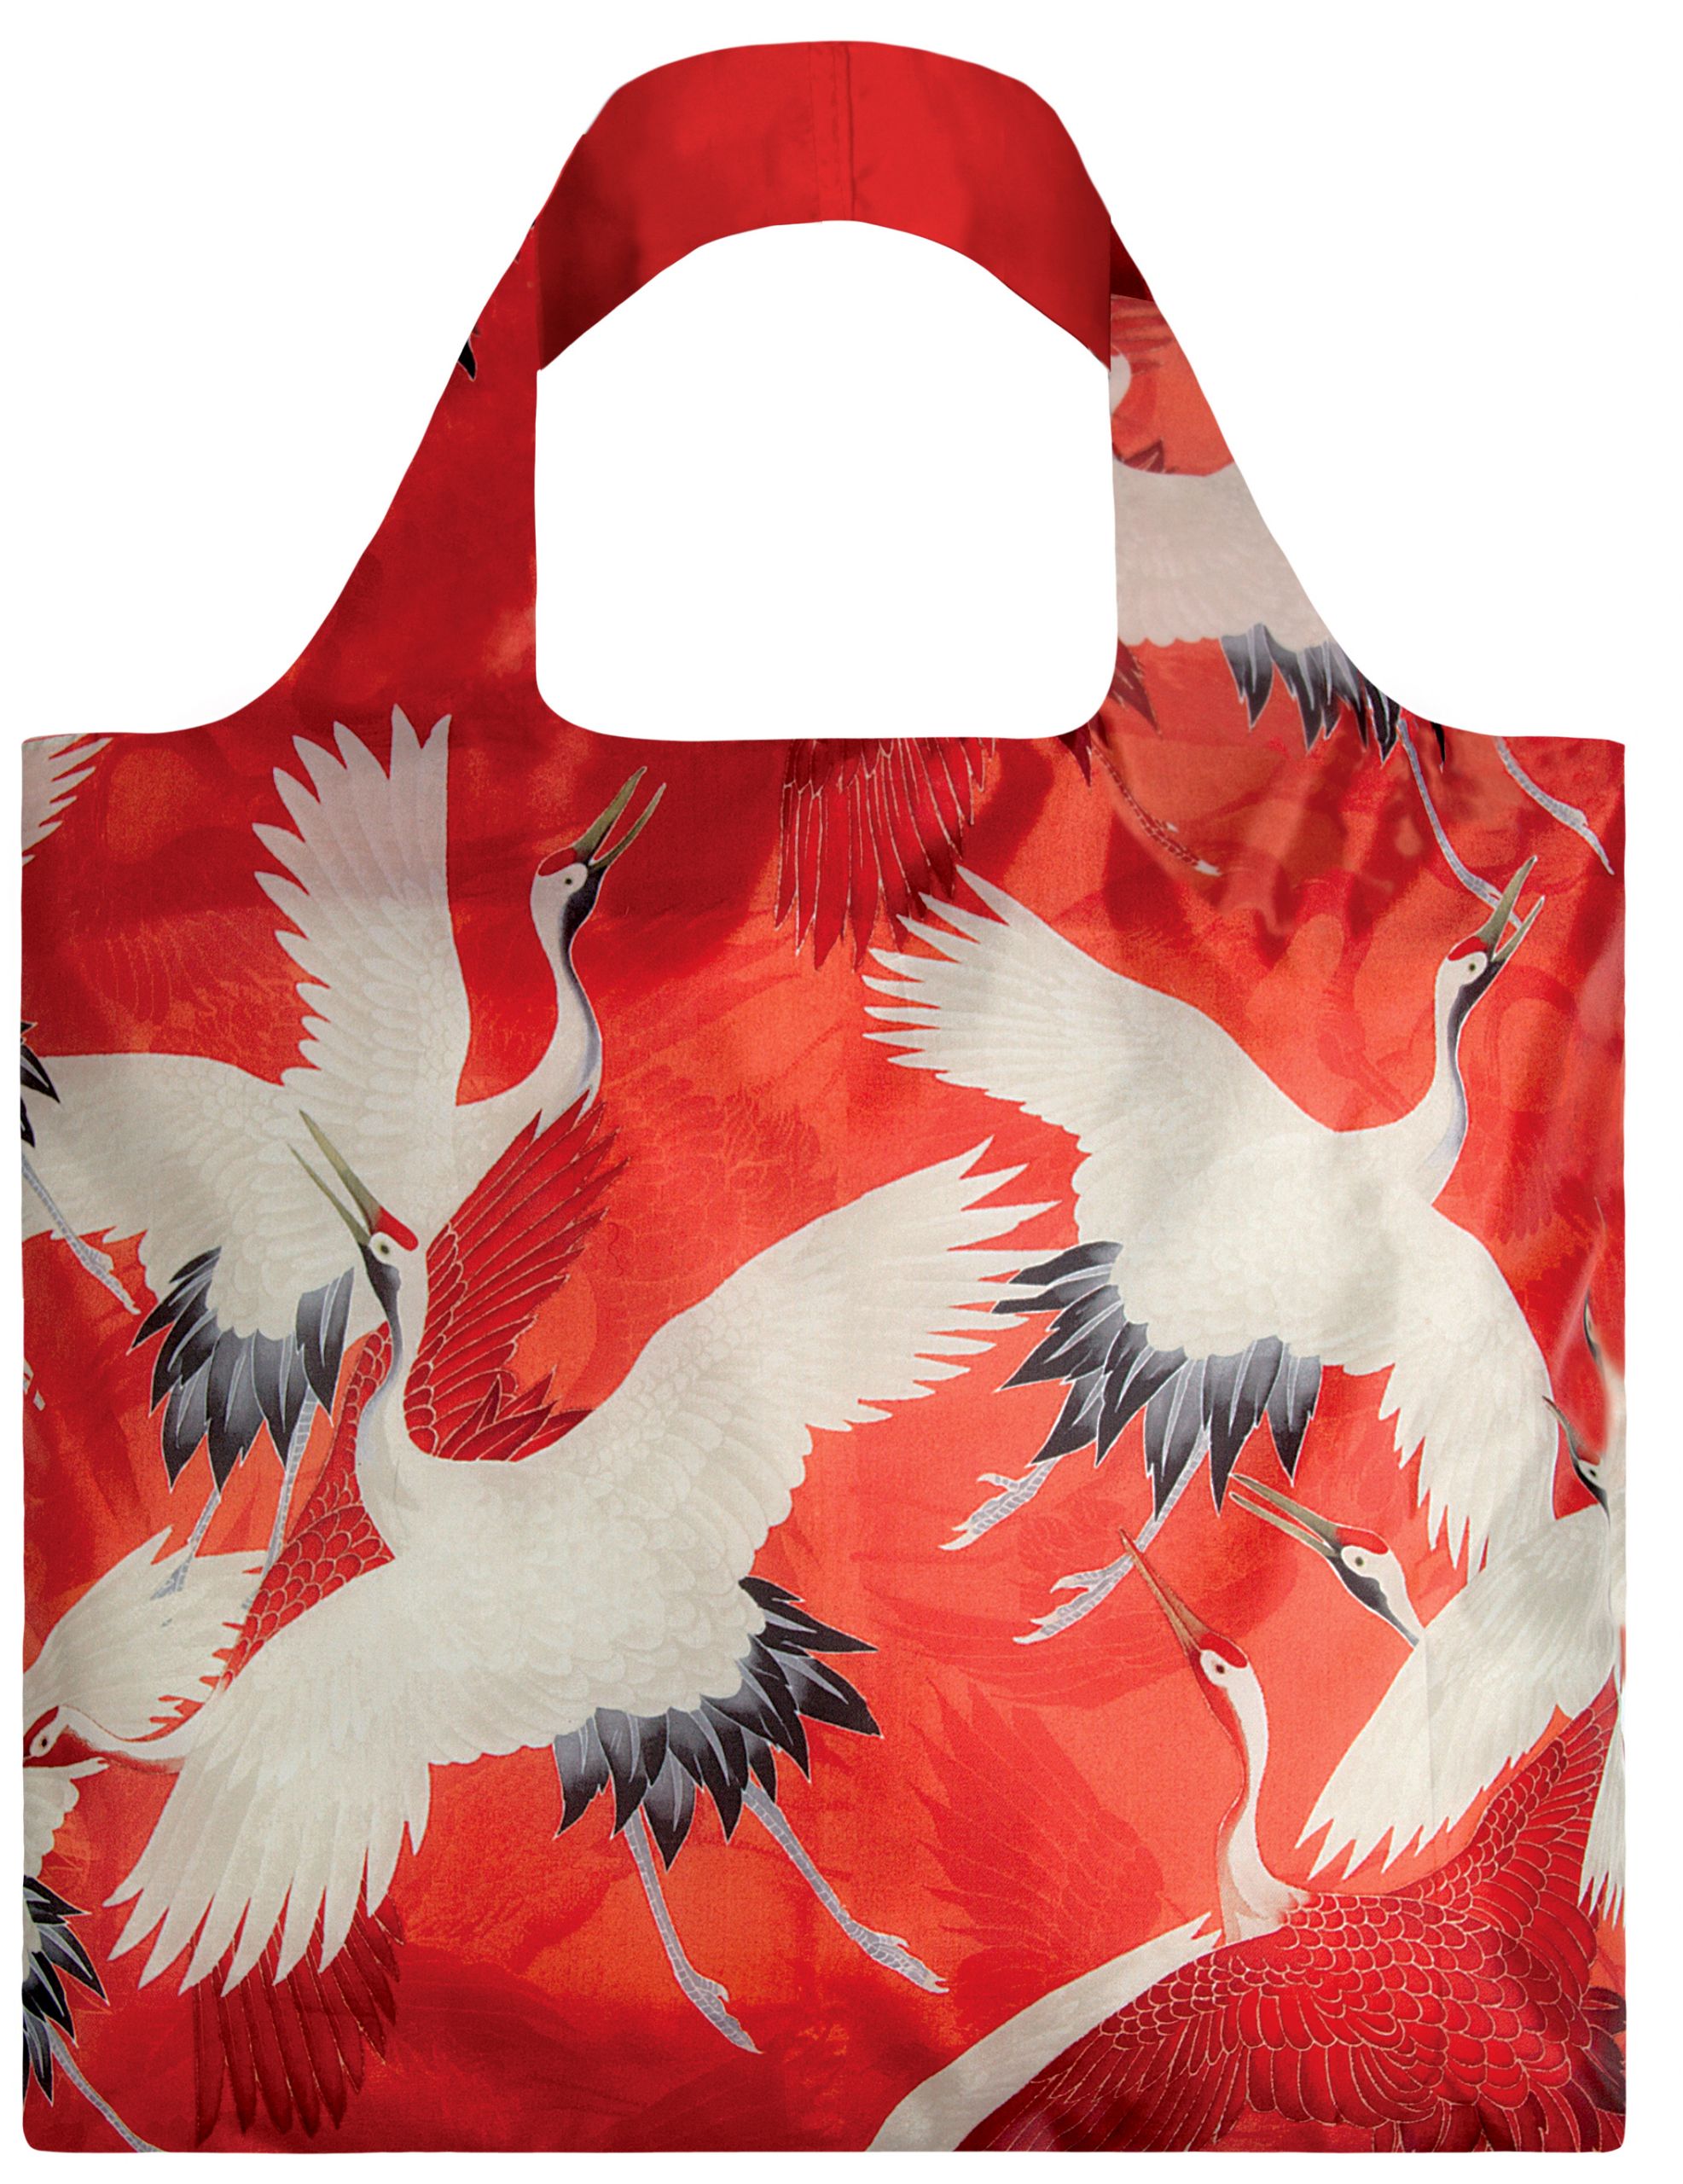 Loqi tote museum collection - white and red cranes